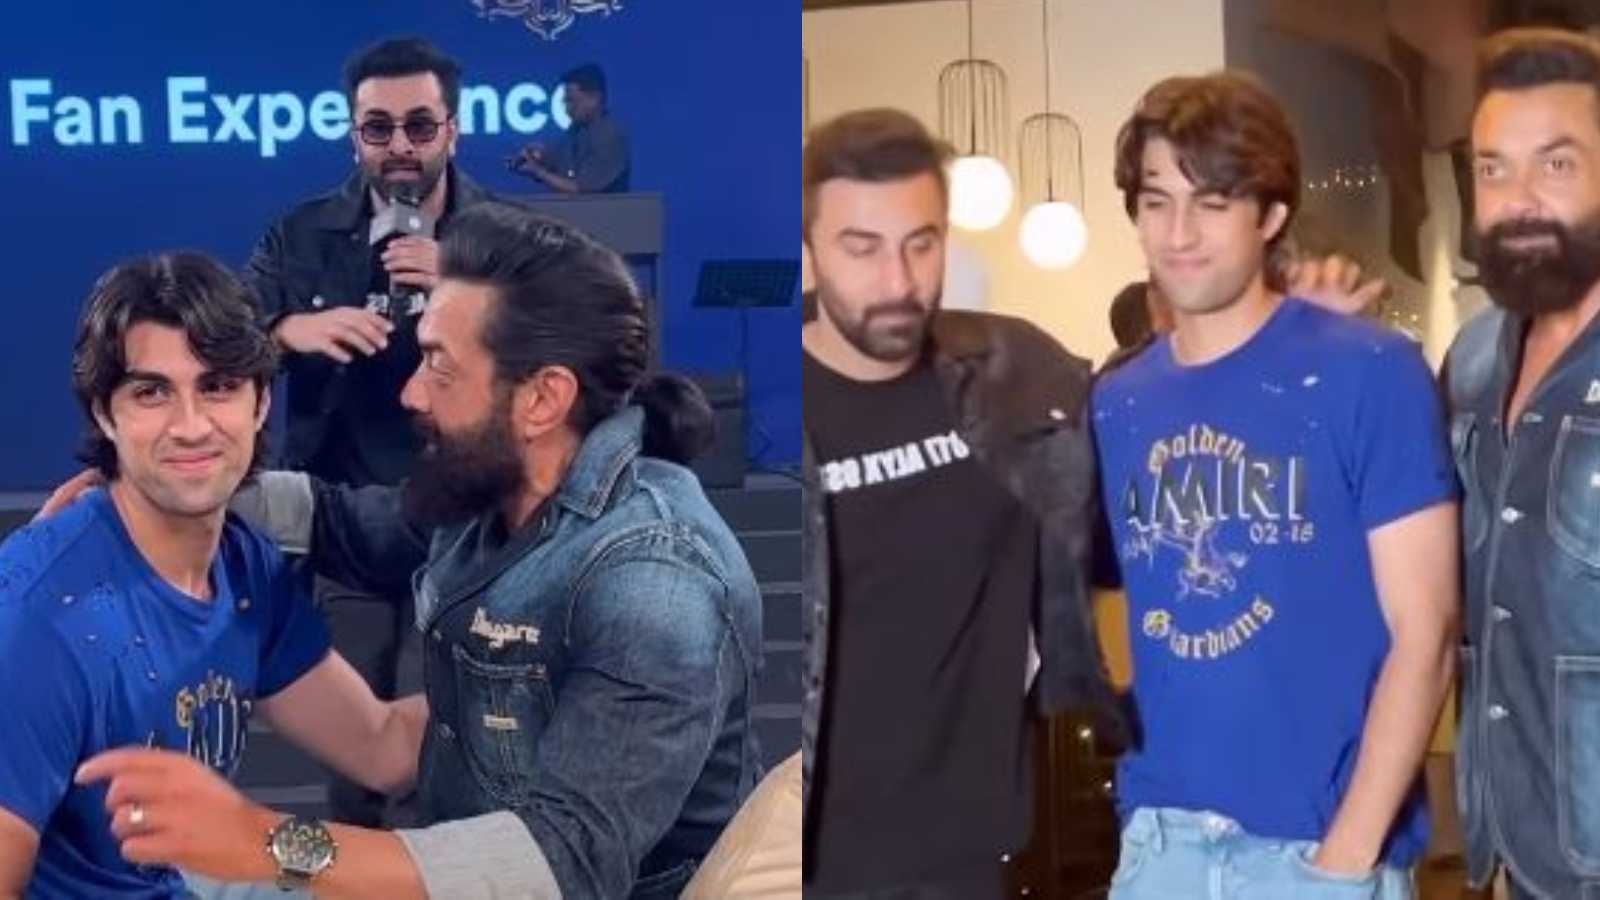 'Cast him in reboot of Gupt 2': Bobby Deol's son Aryaman join him and Ranbir Kapoor at Animal album launch, netizens react